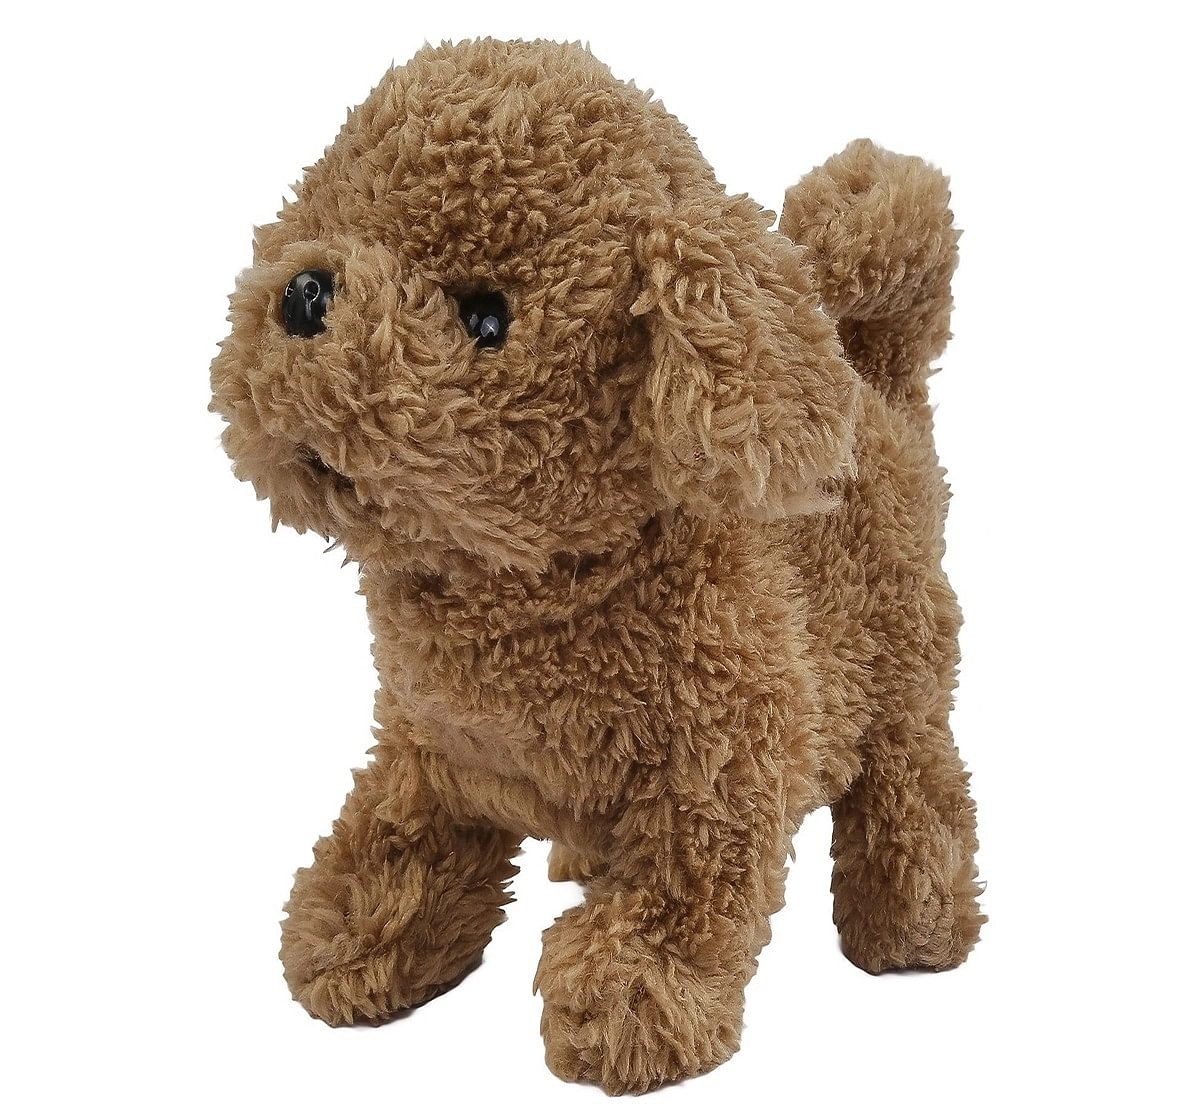 Hamleys Movers & Shakers Baby Cairn Terrier Plush Soft Dog Toy (Brown), 3Y+